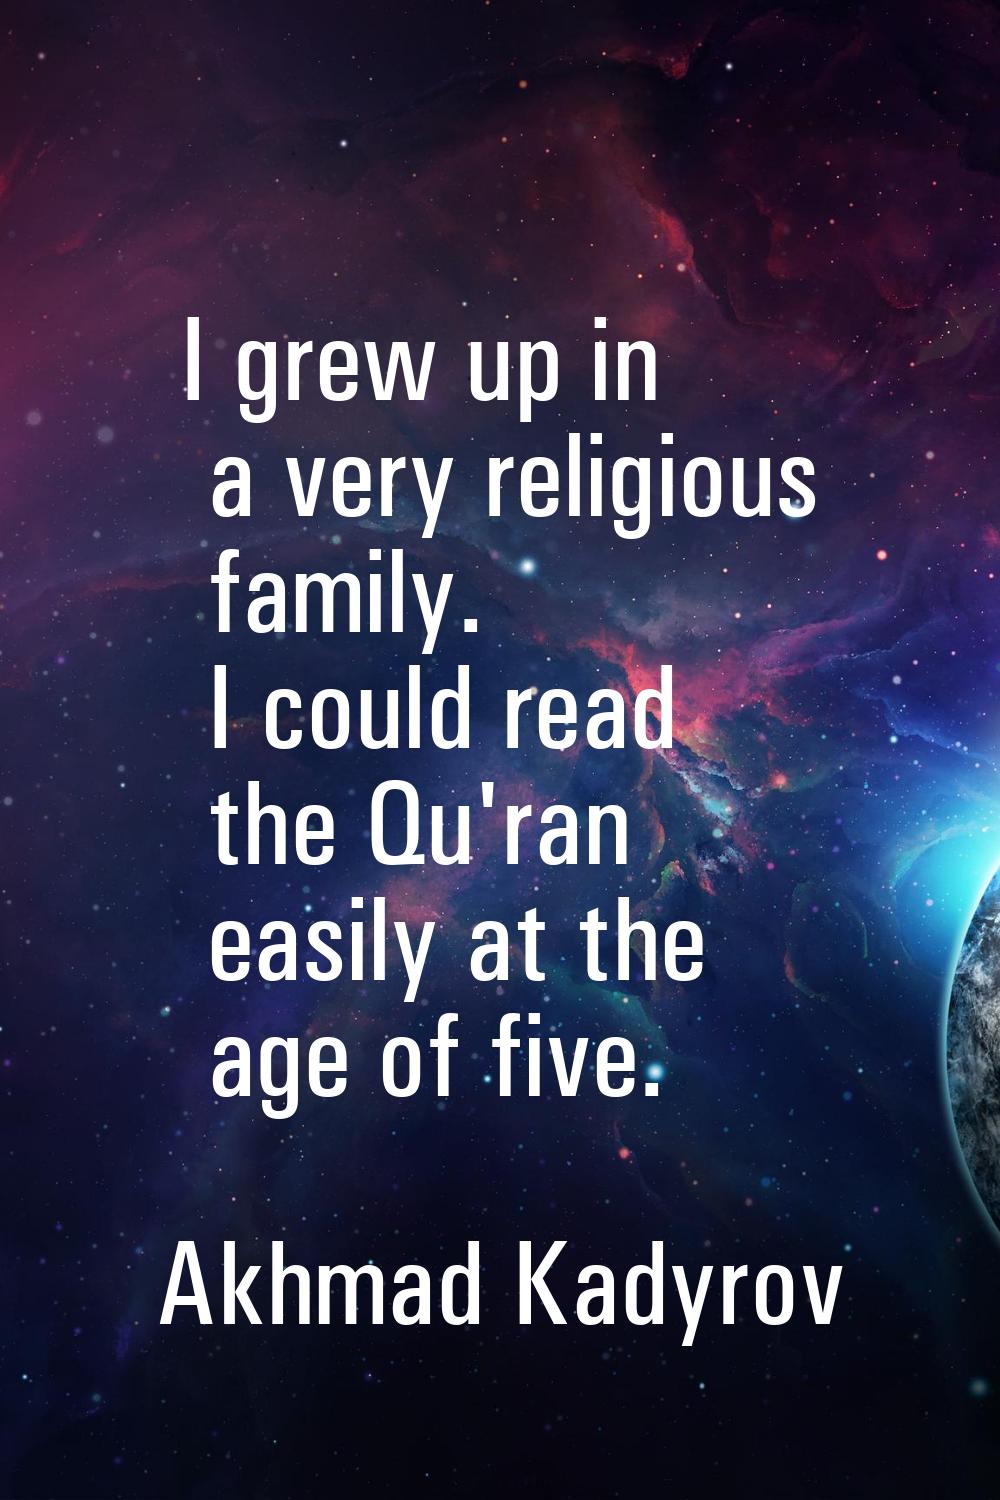 I grew up in a very religious family. I could read the Qu'ran easily at the age of five.